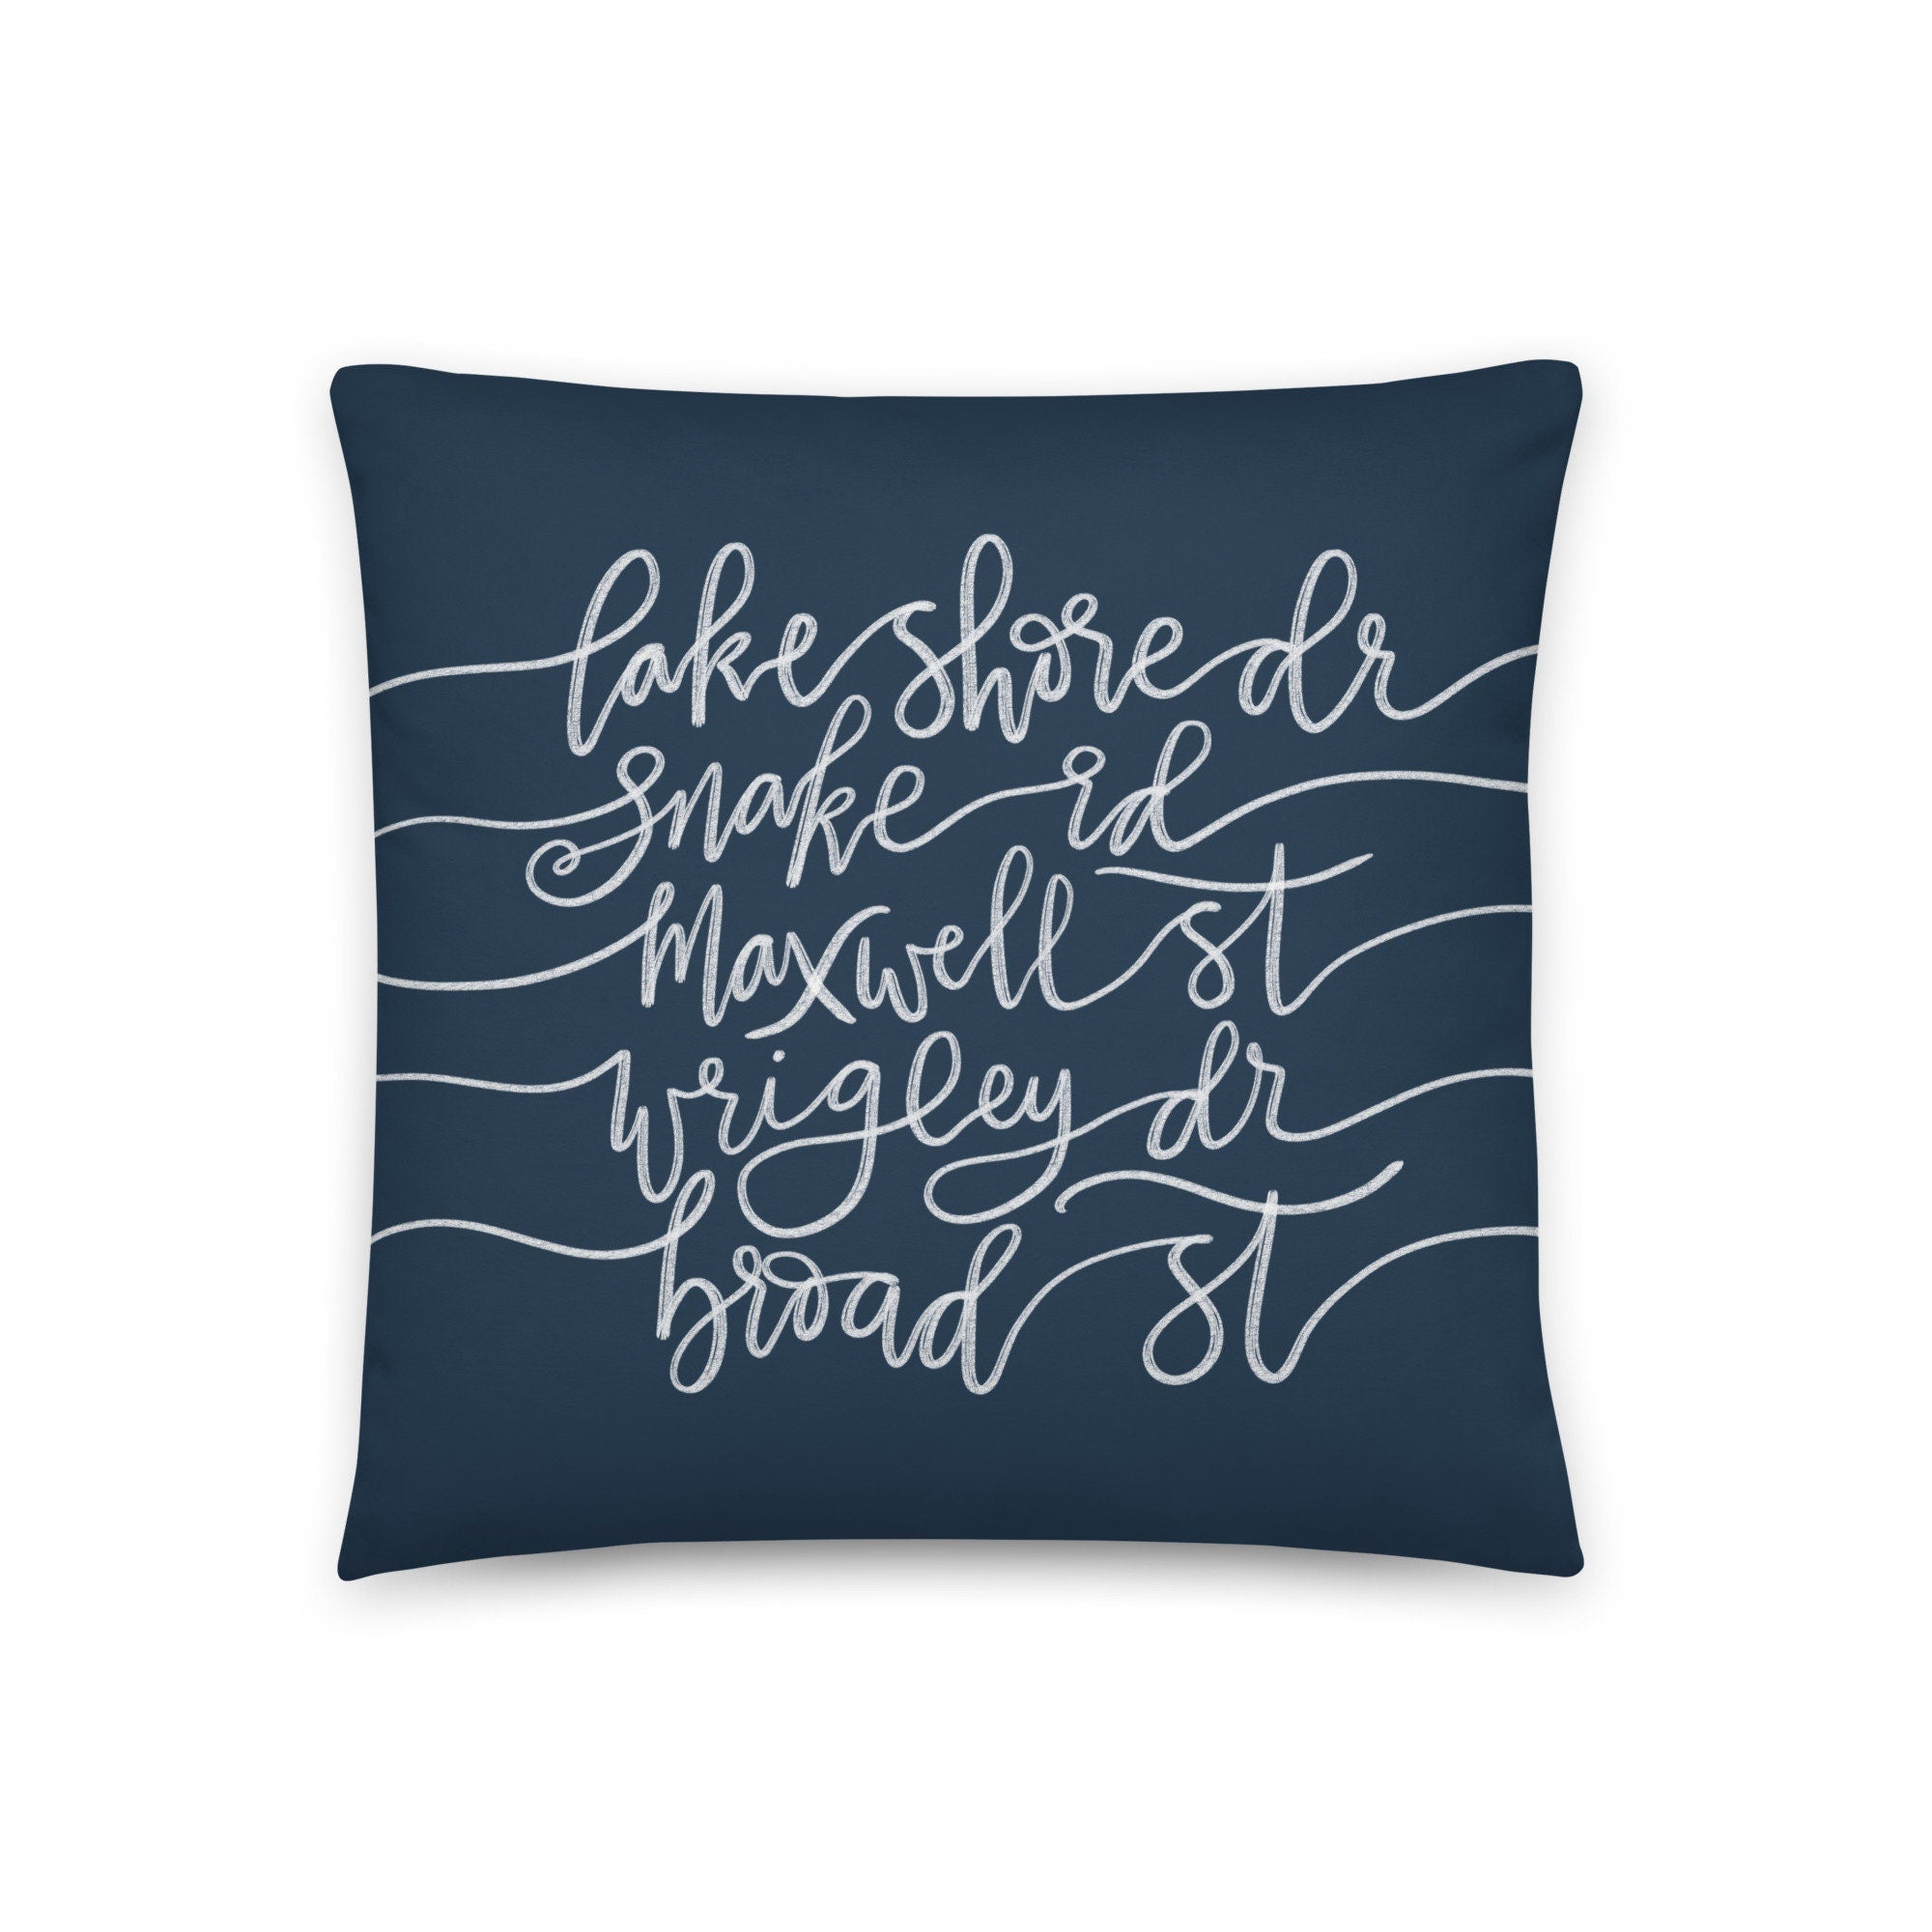 Geneva Lake Wisconsin Navy Blue Pillow With Street Names Local Map - Lake Geneva Wi Cottage Decoration - Signs Signage of Wrigley Drive Wisc